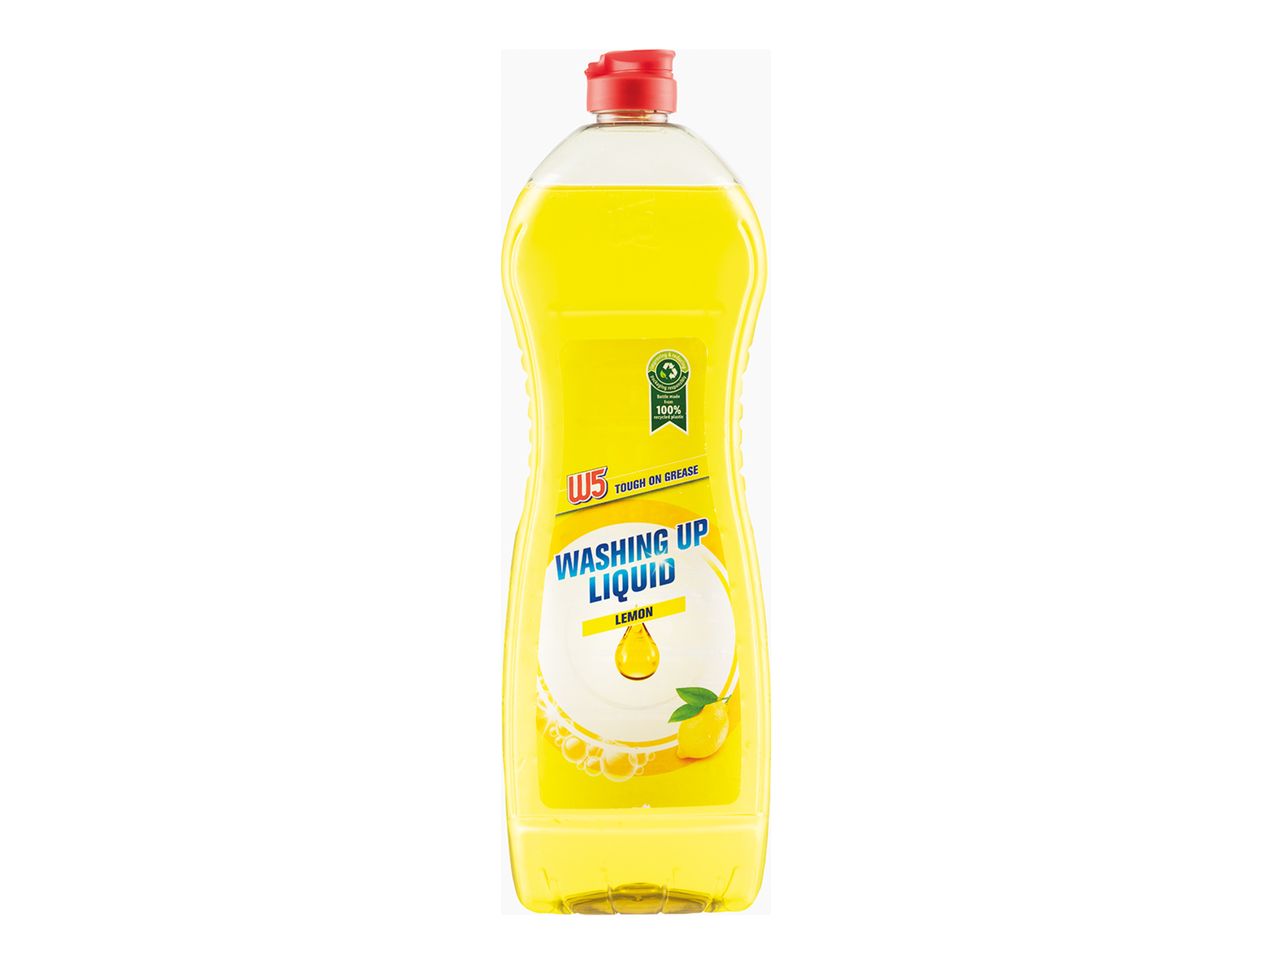 Go to full screen view: W5 Washing Up Liquid - Image 1